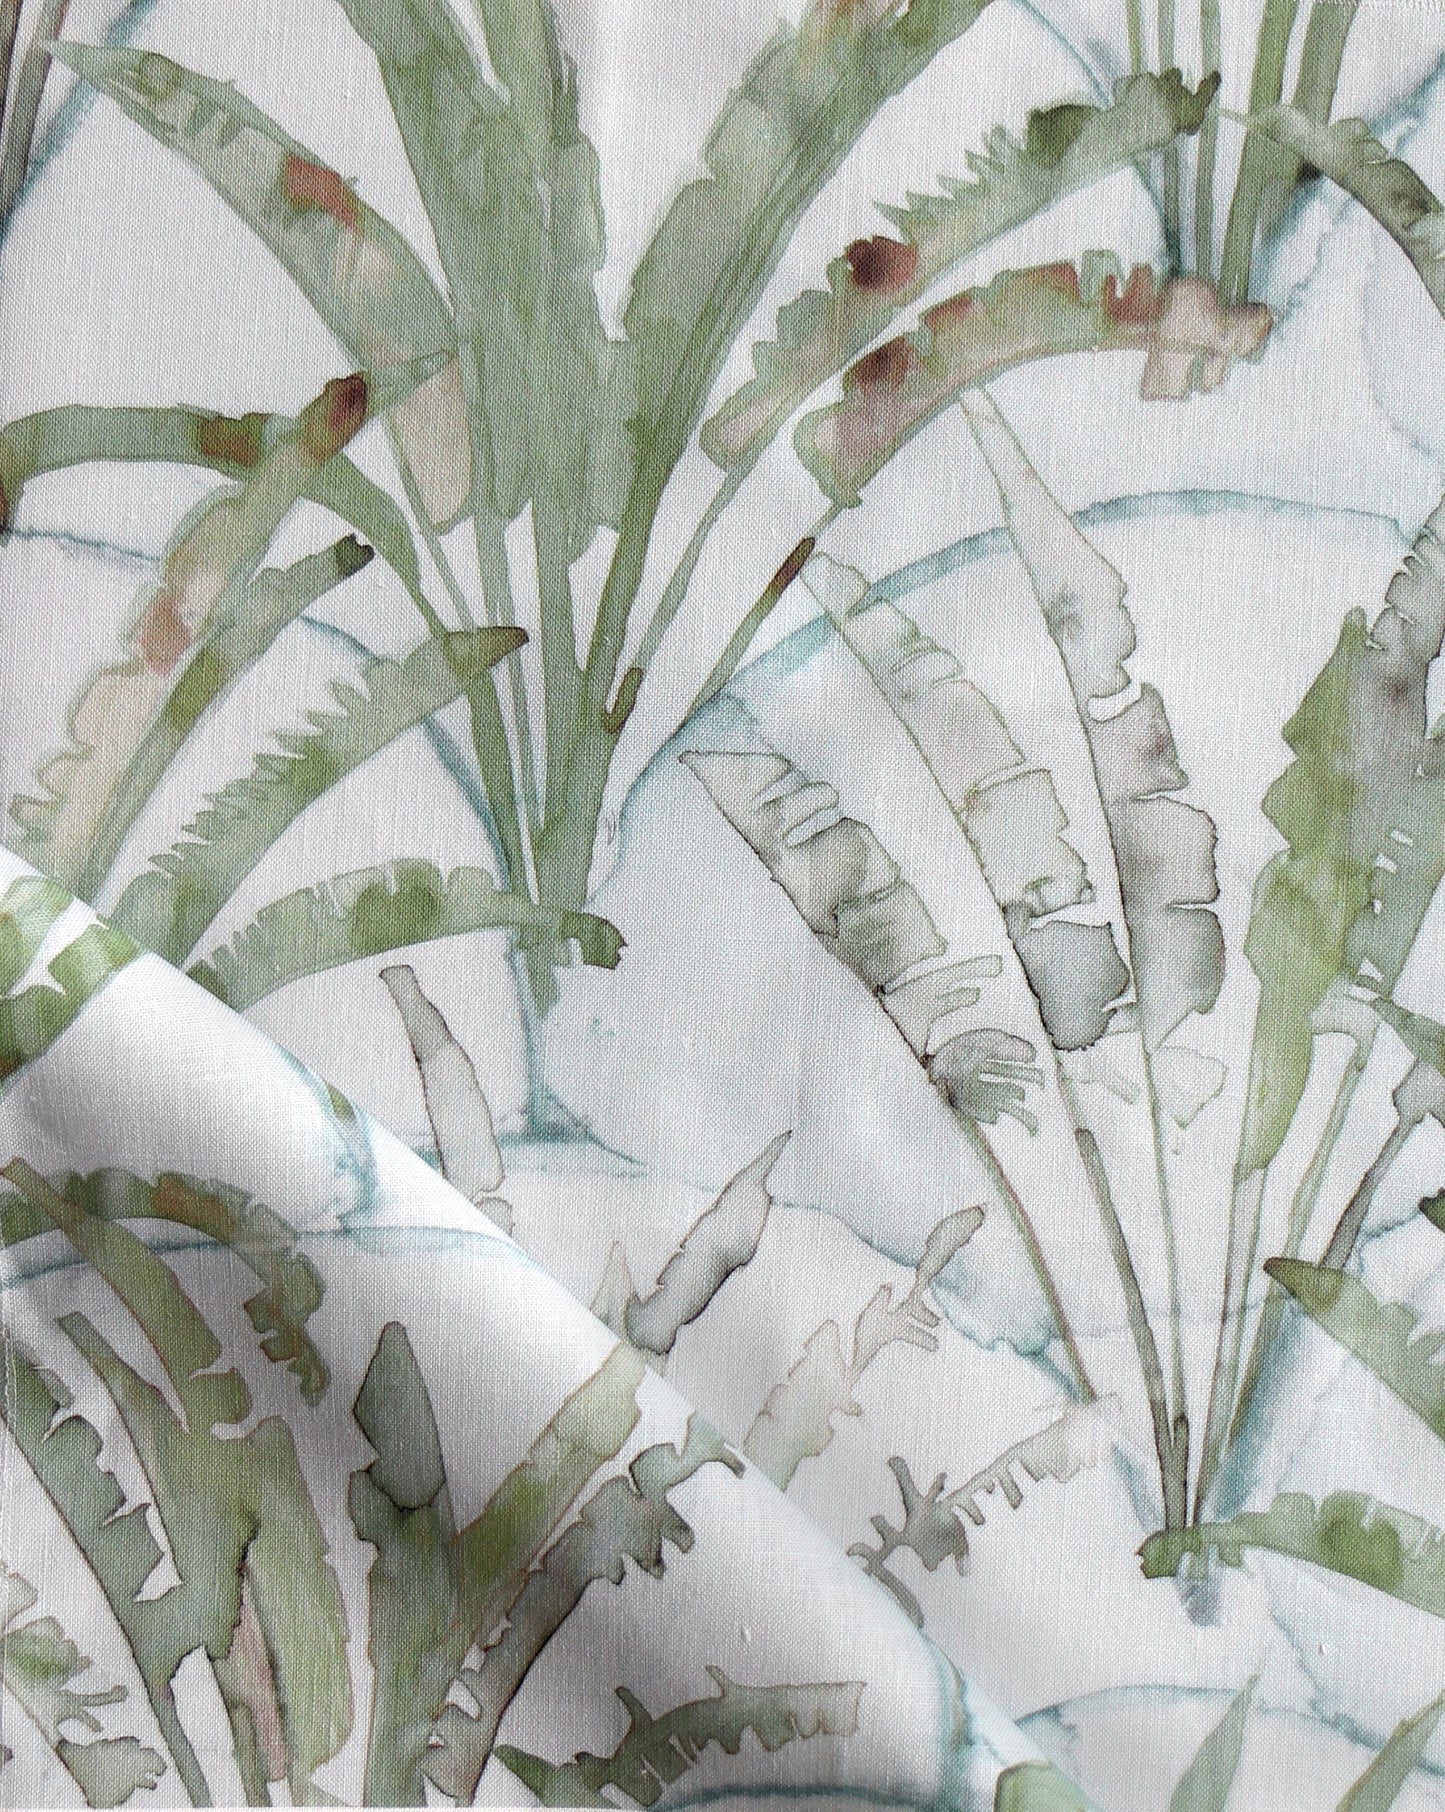 Travelers Palm displays fan-like trees arrayed against a scallop background In our Sage colorway, the palette is green and blue